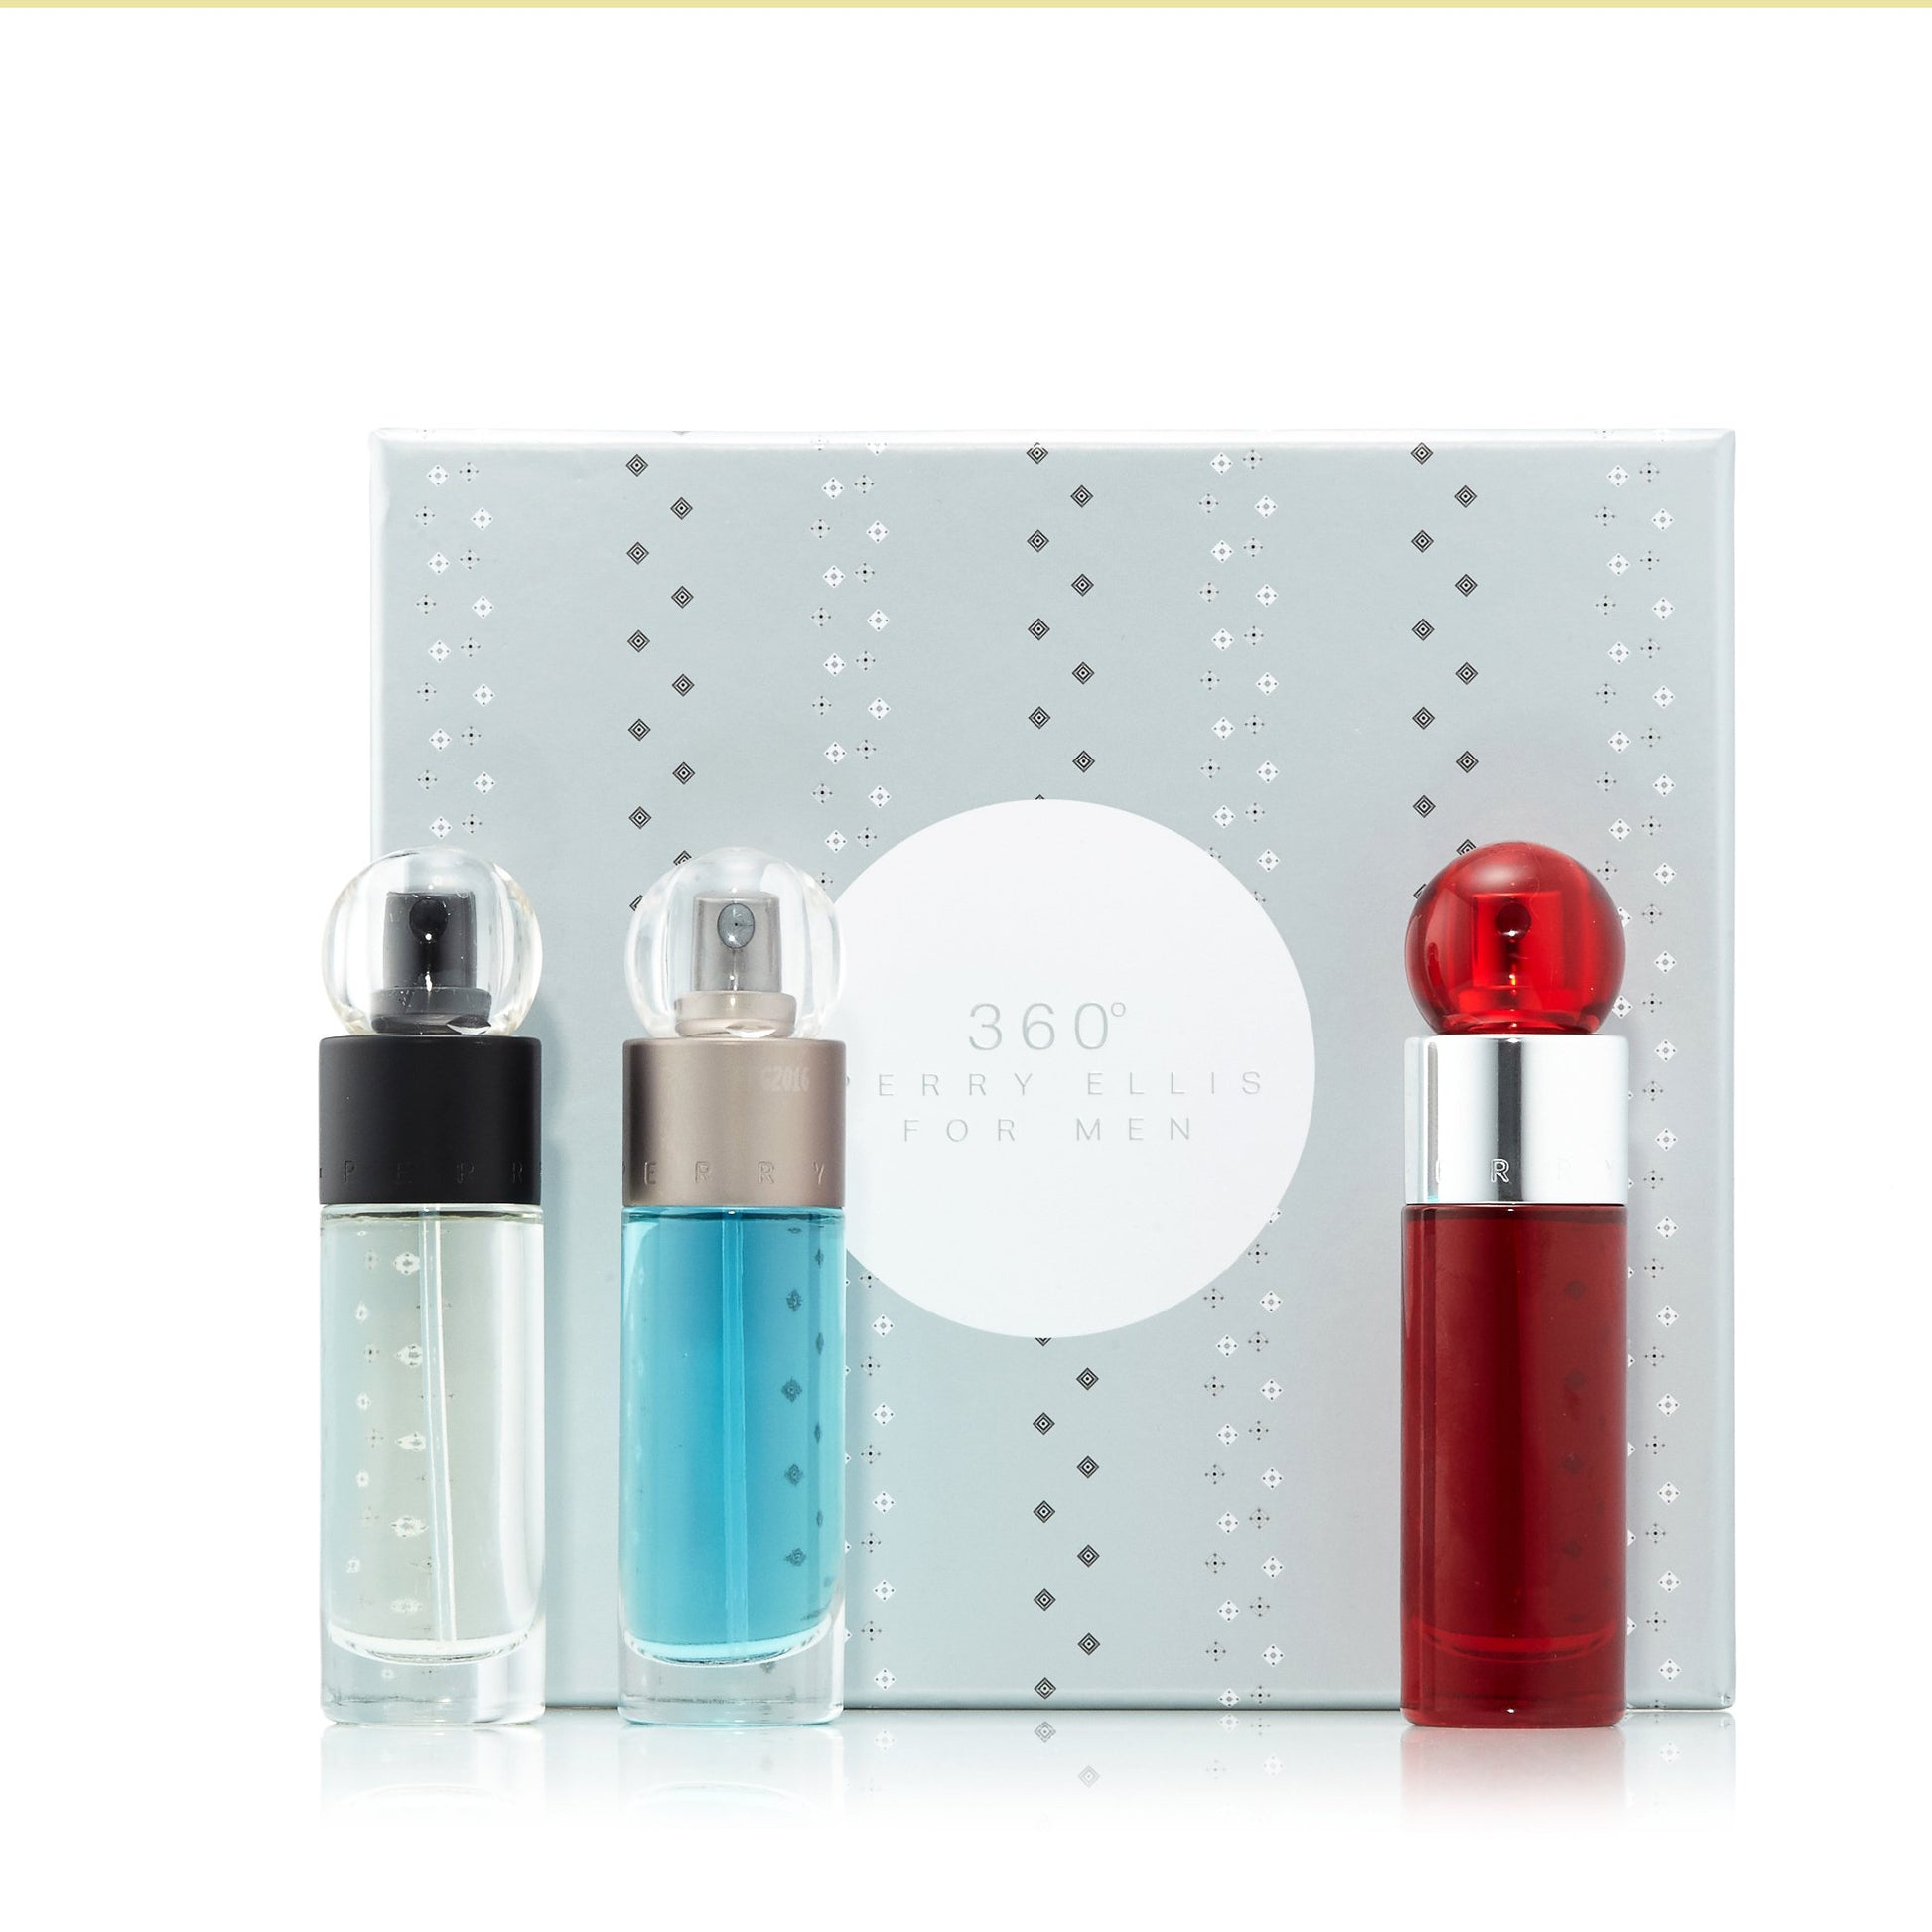 360° Miniature Set for Men by Perry Ellis, Product image 2